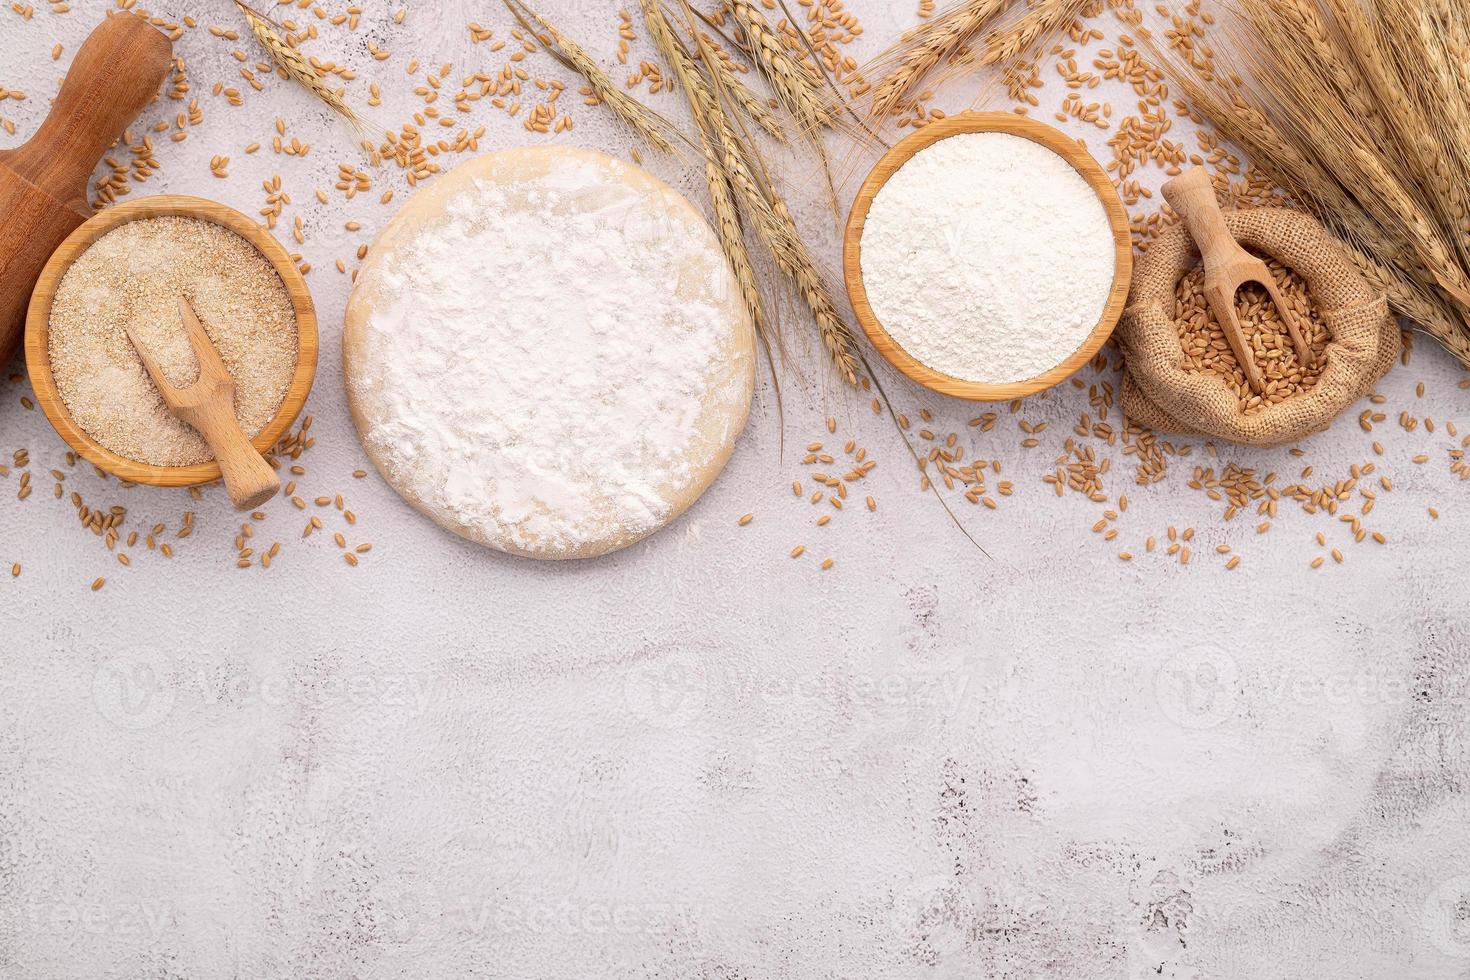 The ingredients for homemade pizza dough with wheat ears ,wheat flour and wheat grains set up on white concrete background. photo